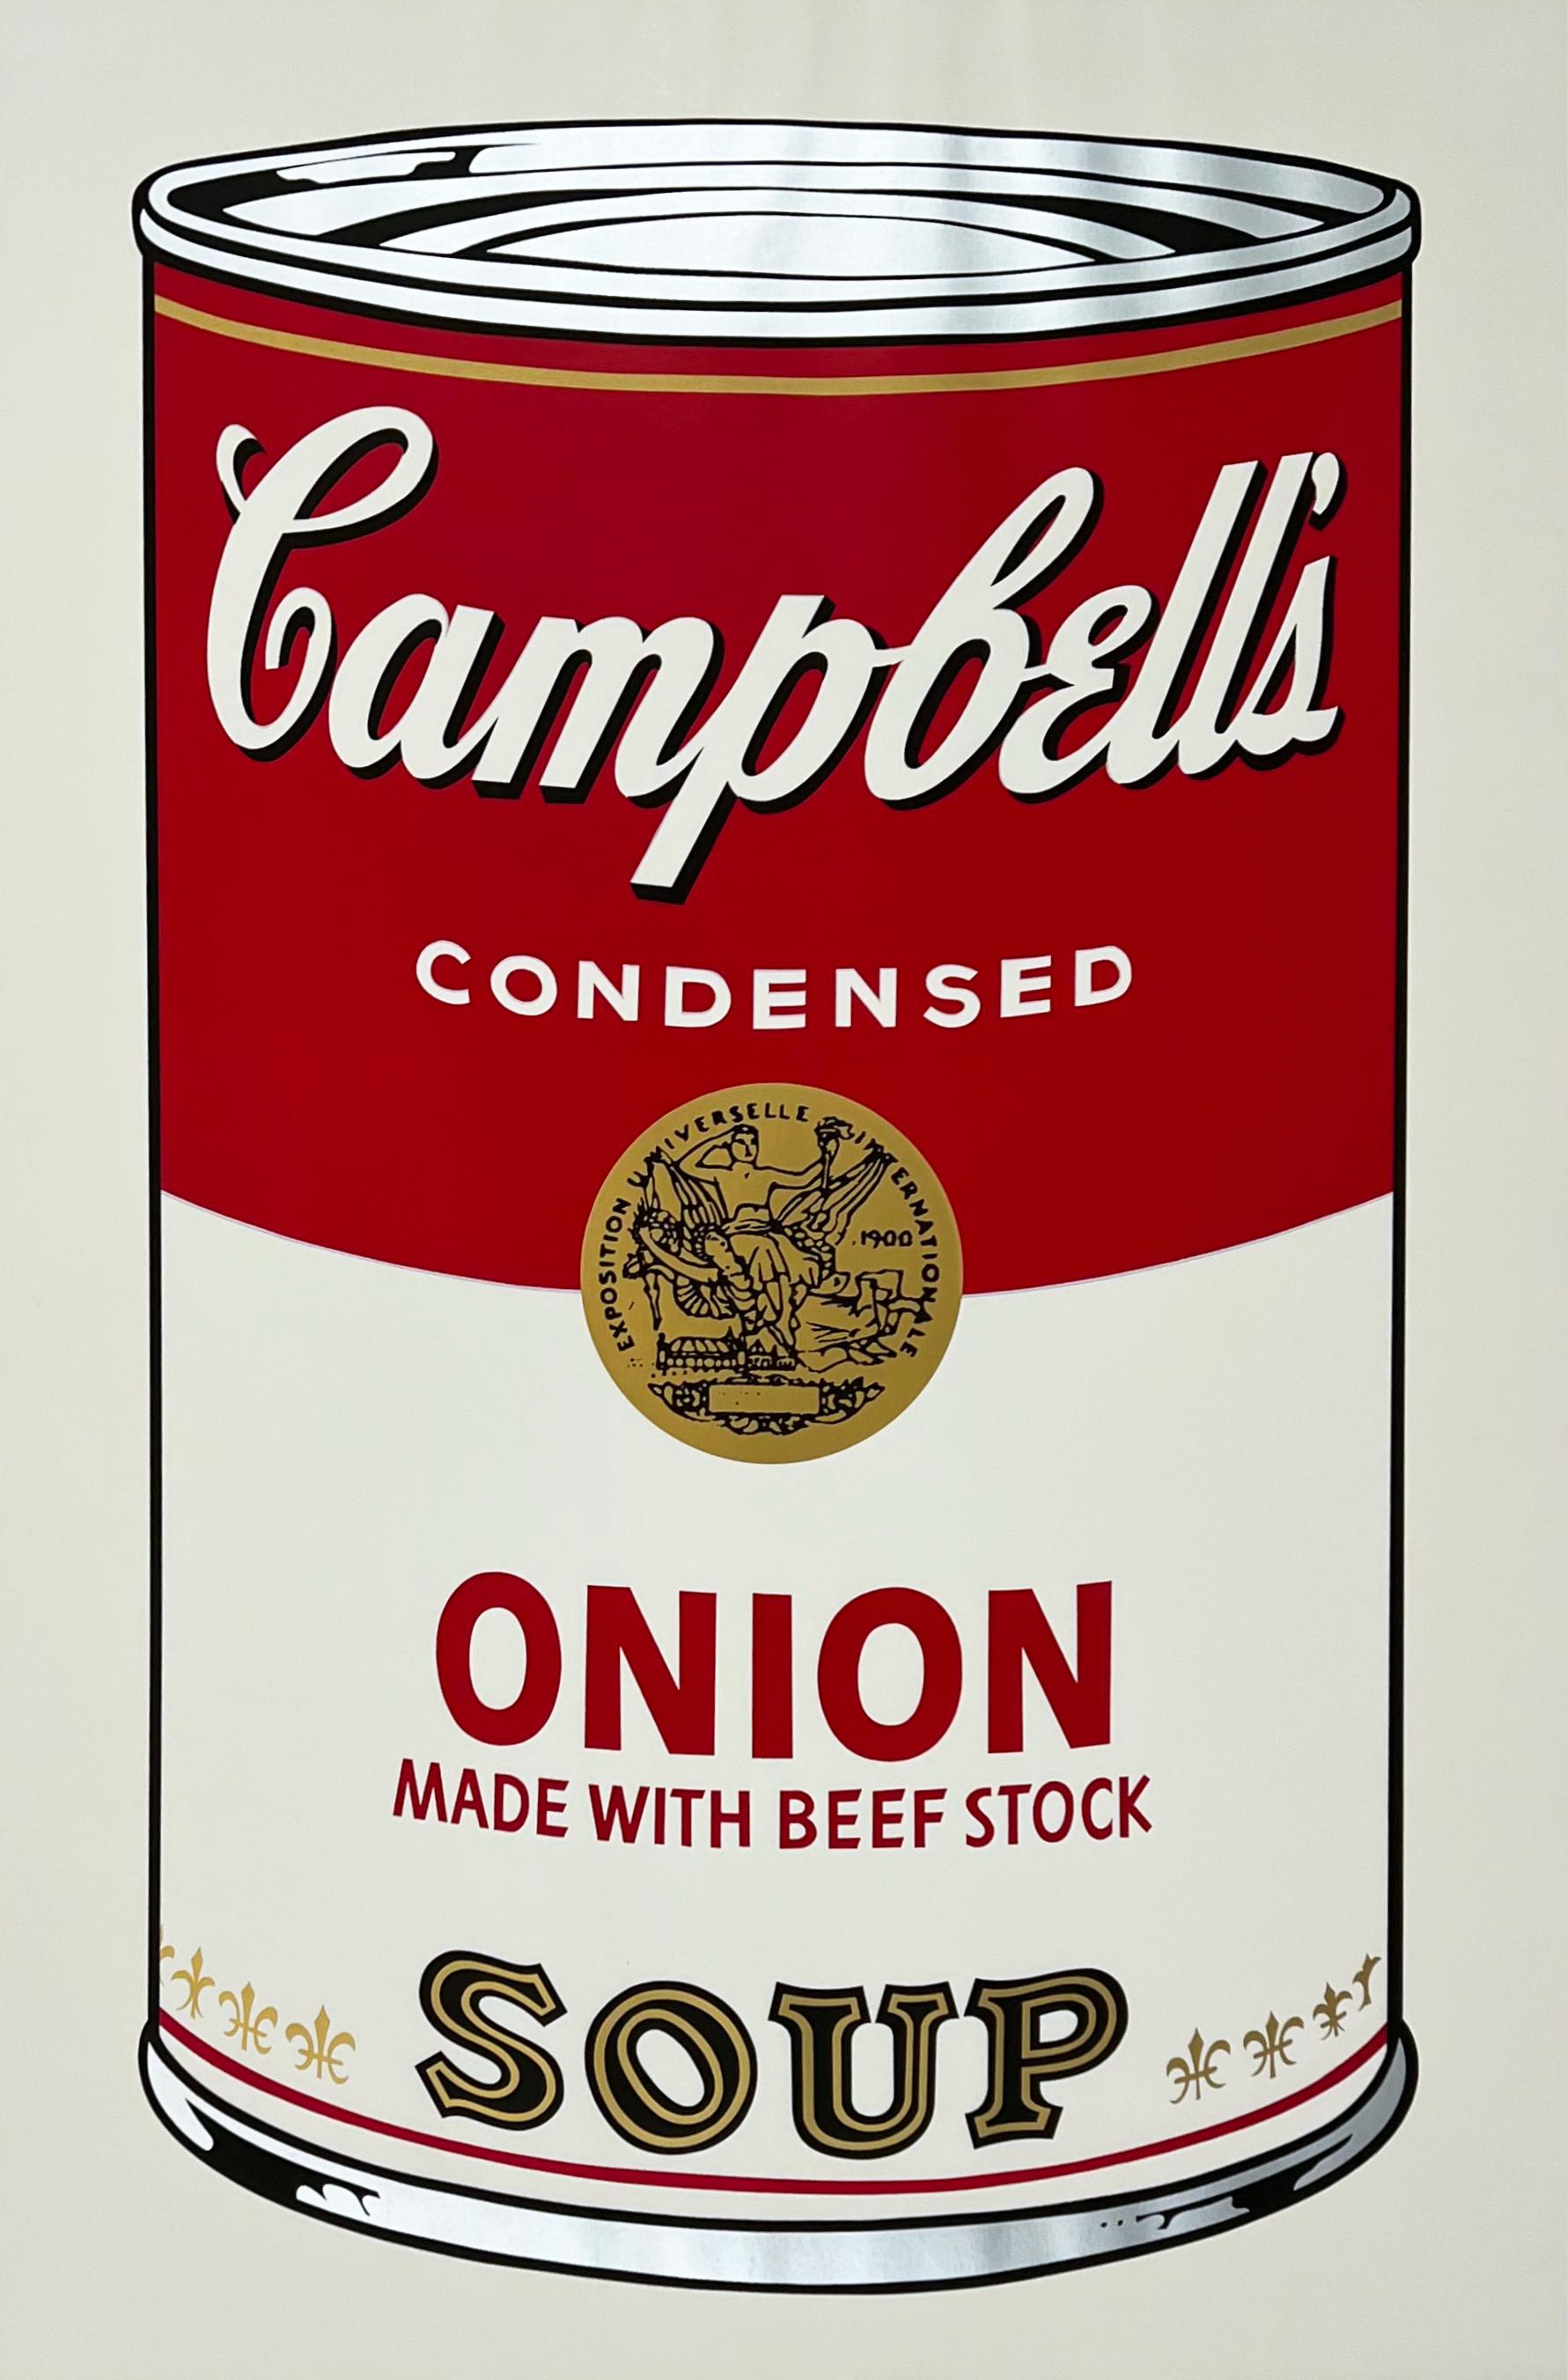 Artist: Andy Warhol
Title: Onion
Portfolio: 1968 Campbell's Soup I
Medium: Screenprint on paper
Year: 1968
Edition: 198/250
Signed: Yes, in ball-point pen on verso 
Reference: Feldman II.47
Sheet Size: 35" x 23"